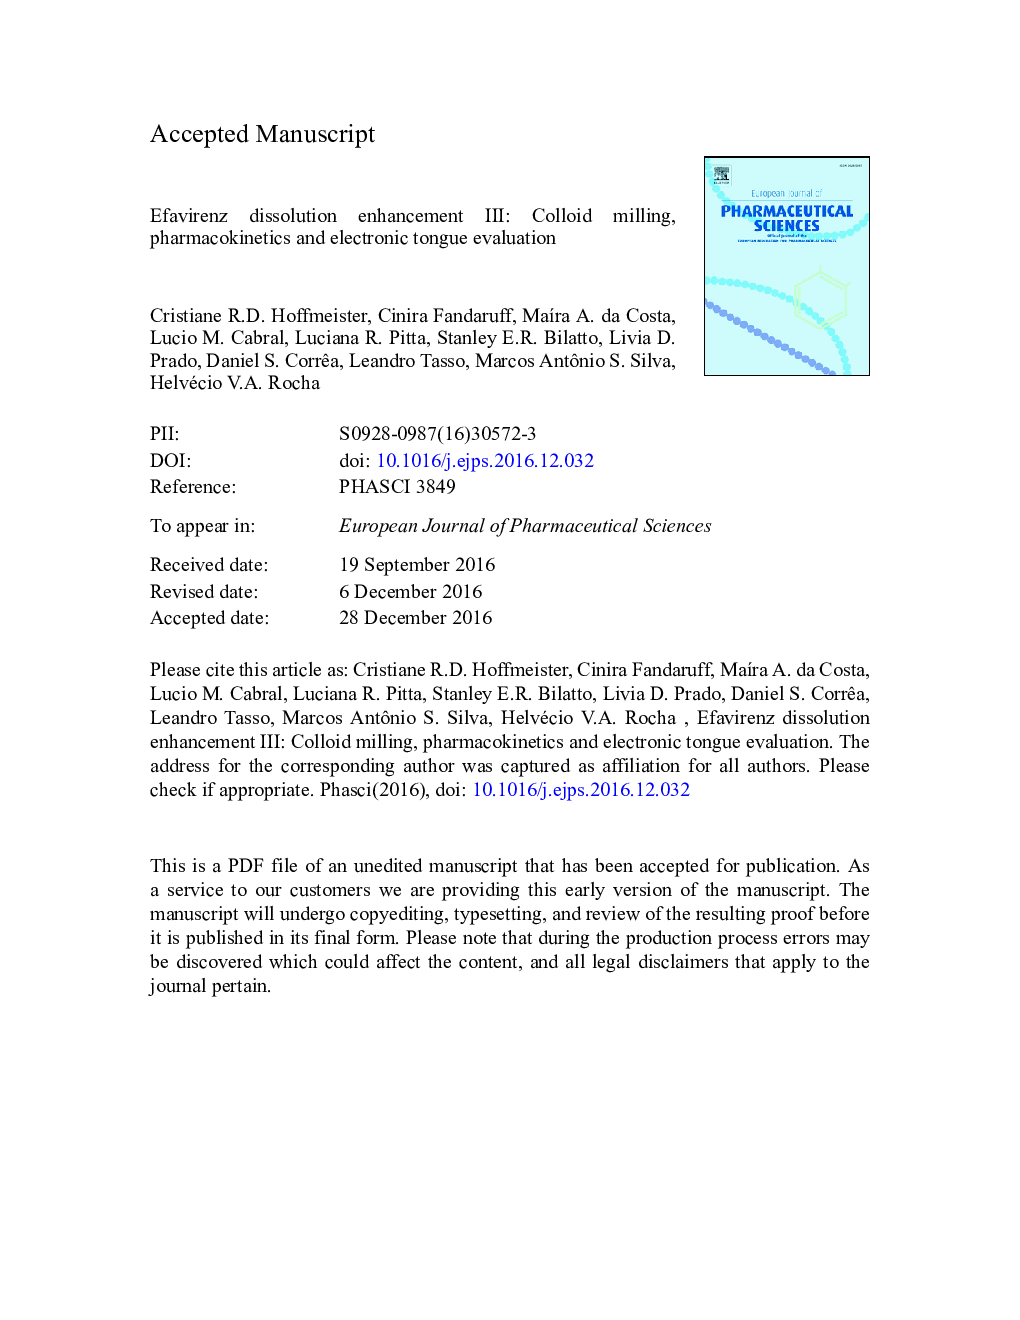 Efavirenz dissolution enhancement III: Colloid milling, pharmacokinetics and electronic tongue evaluation